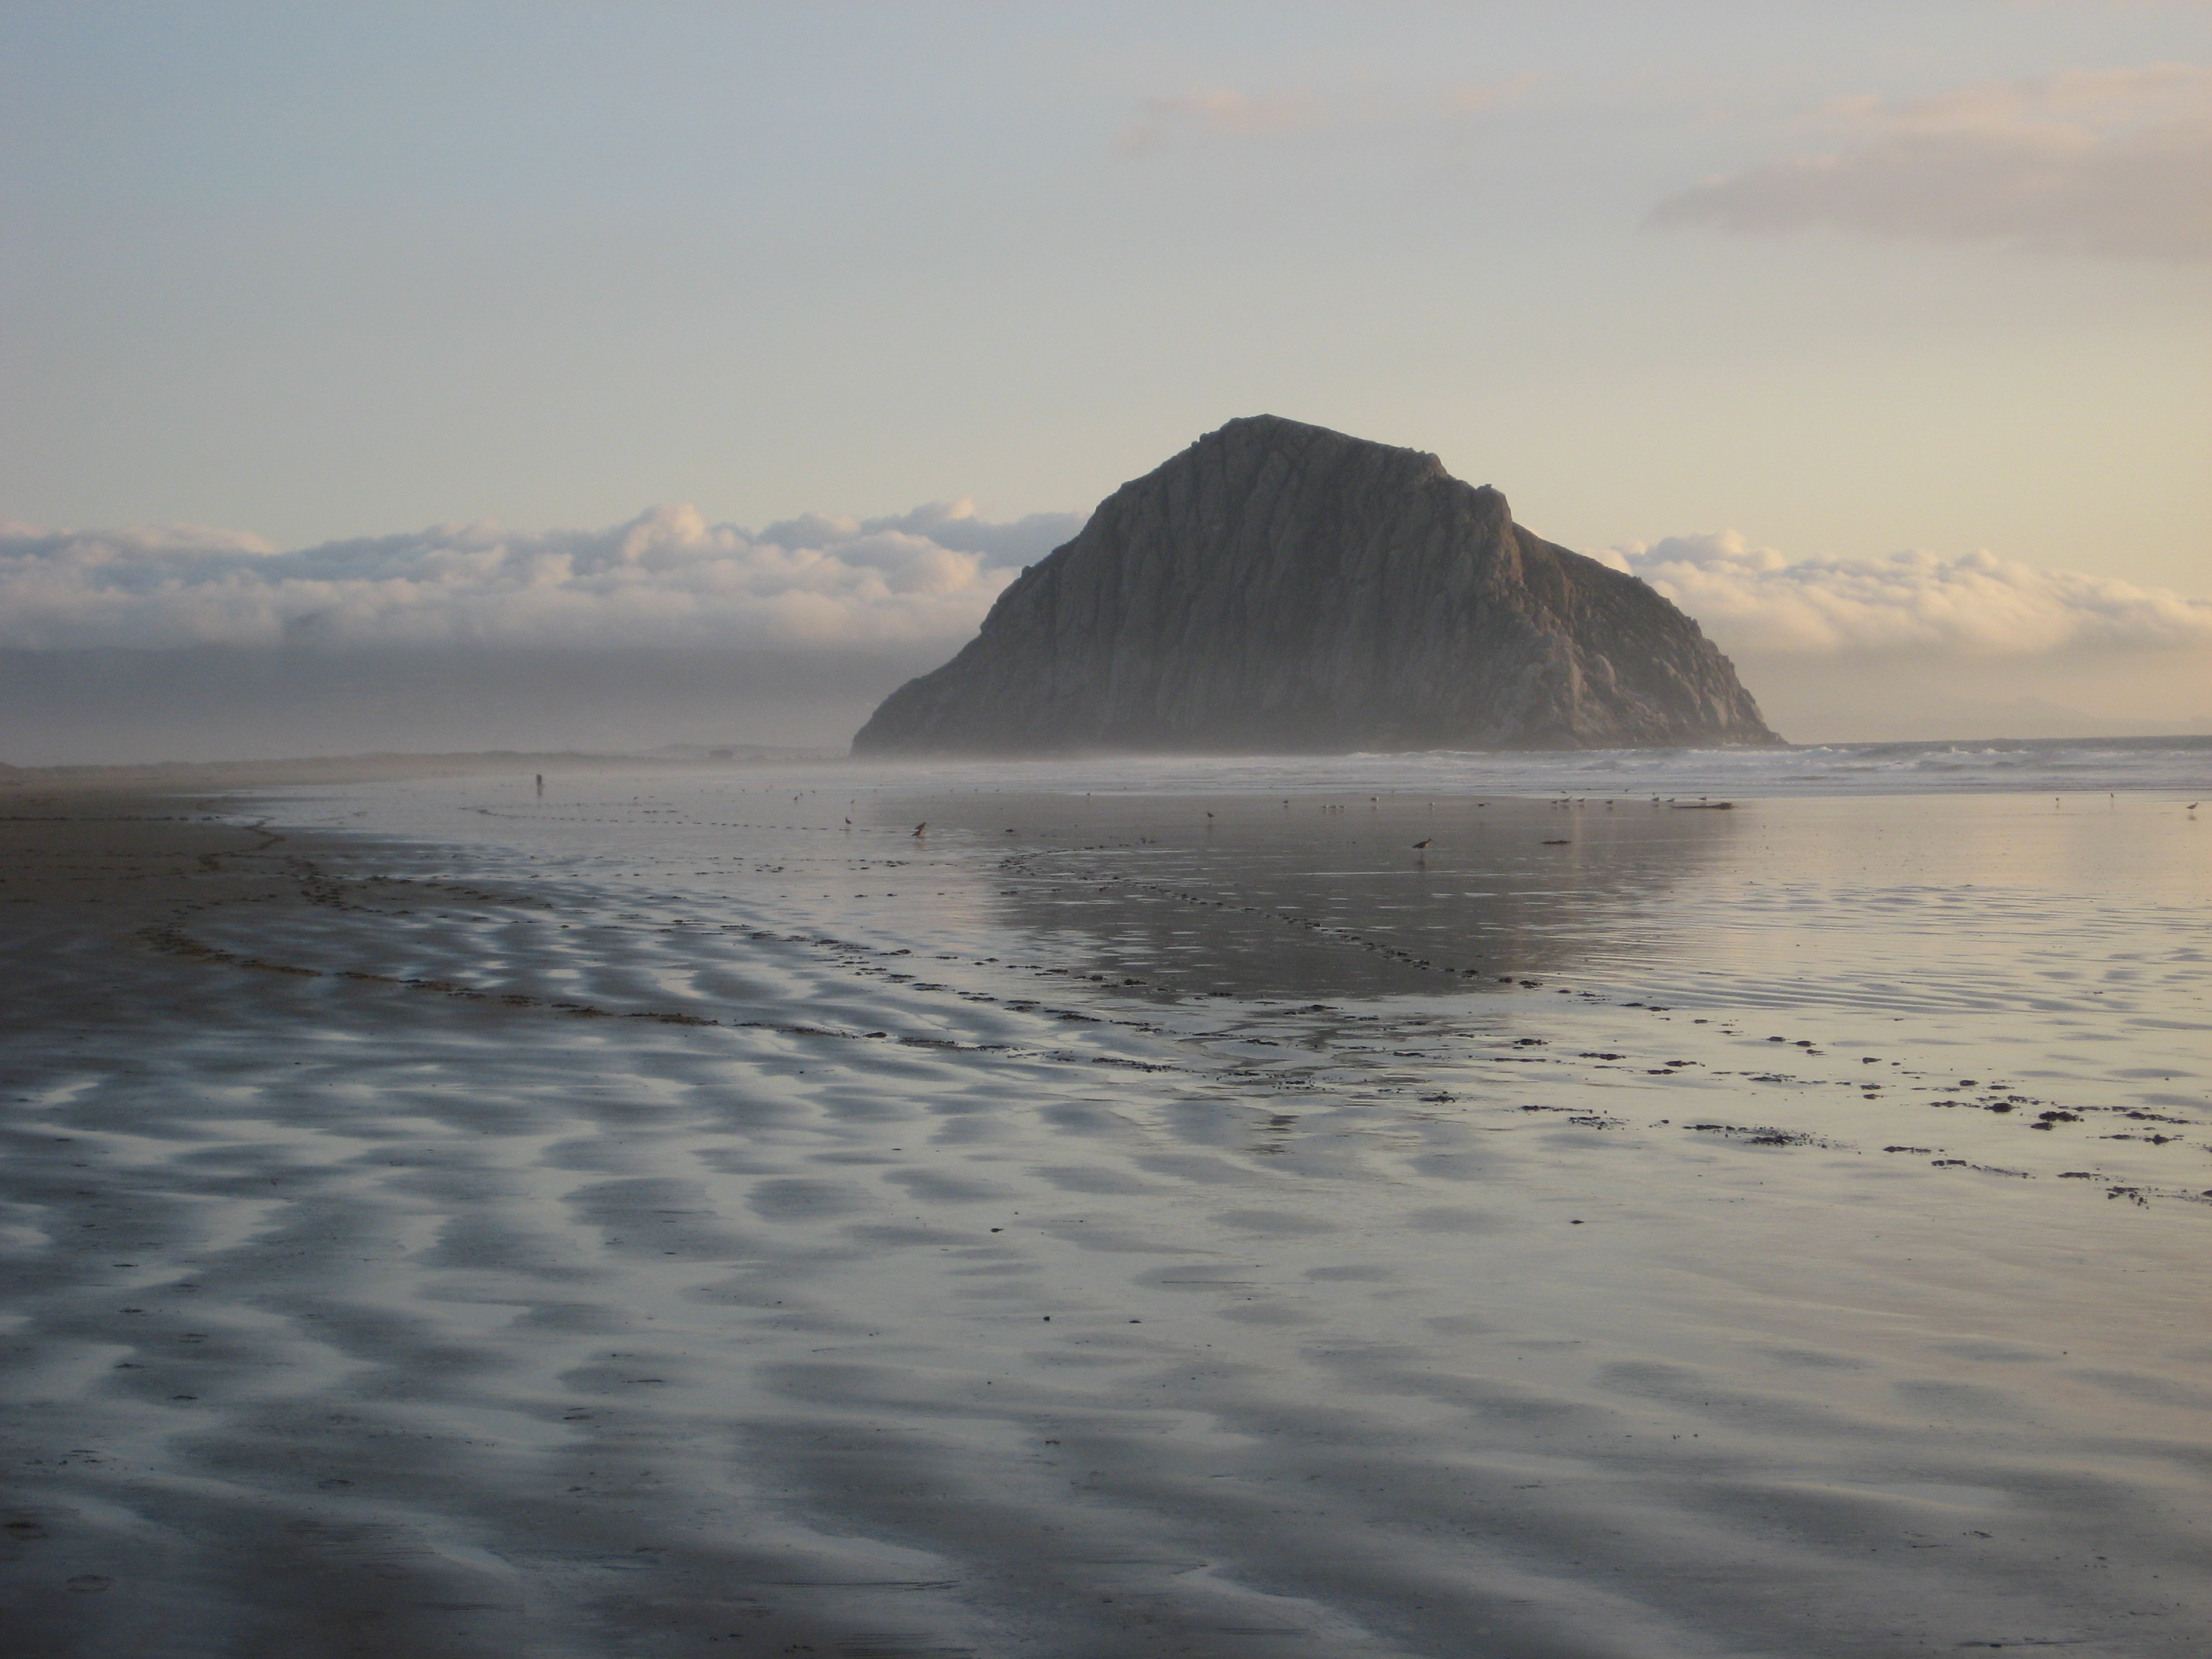 Morro Rock reflected in rippled wet sand and backed by fluffy white clouds on a dreamy evening.